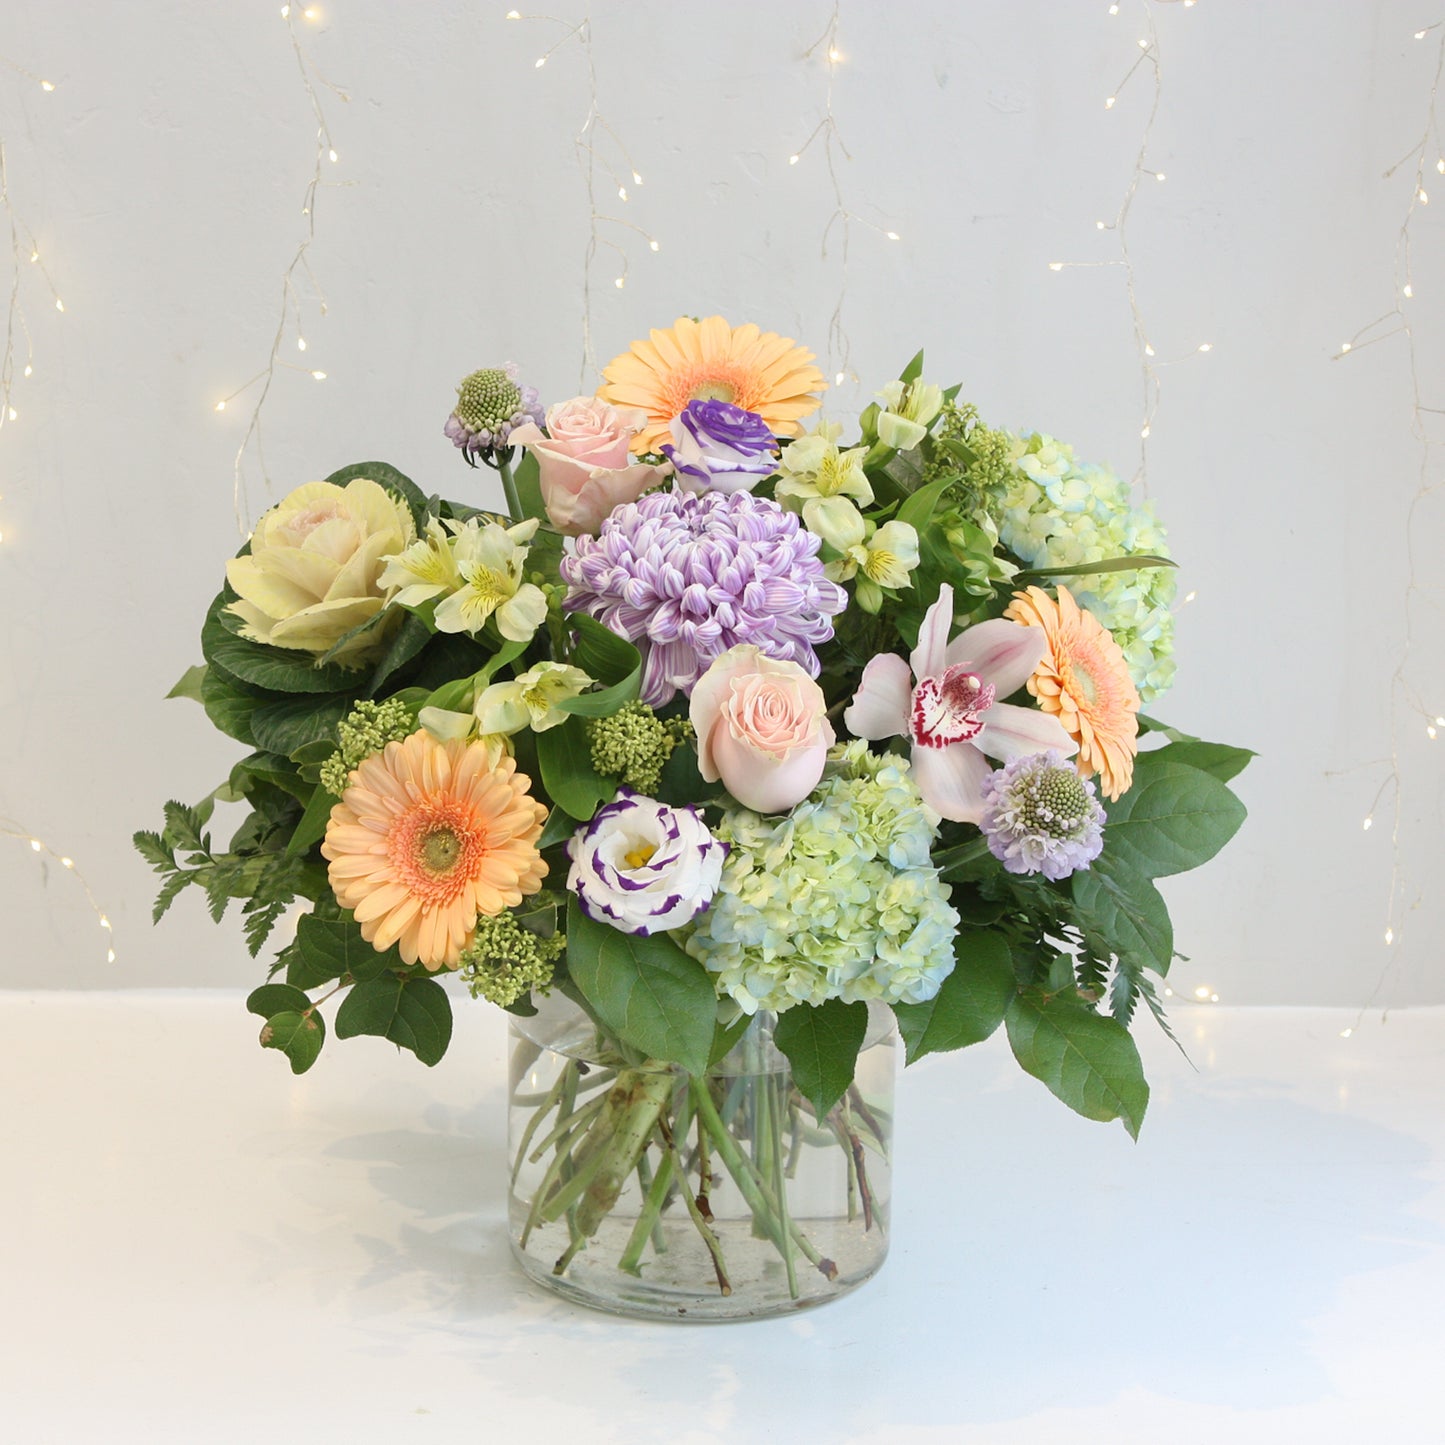 pastel coloured floral arrangement with mix of gerbera daisieds hydrangea roses eucalyptus. Designed at oleander floral design in toronto offering same day delivery